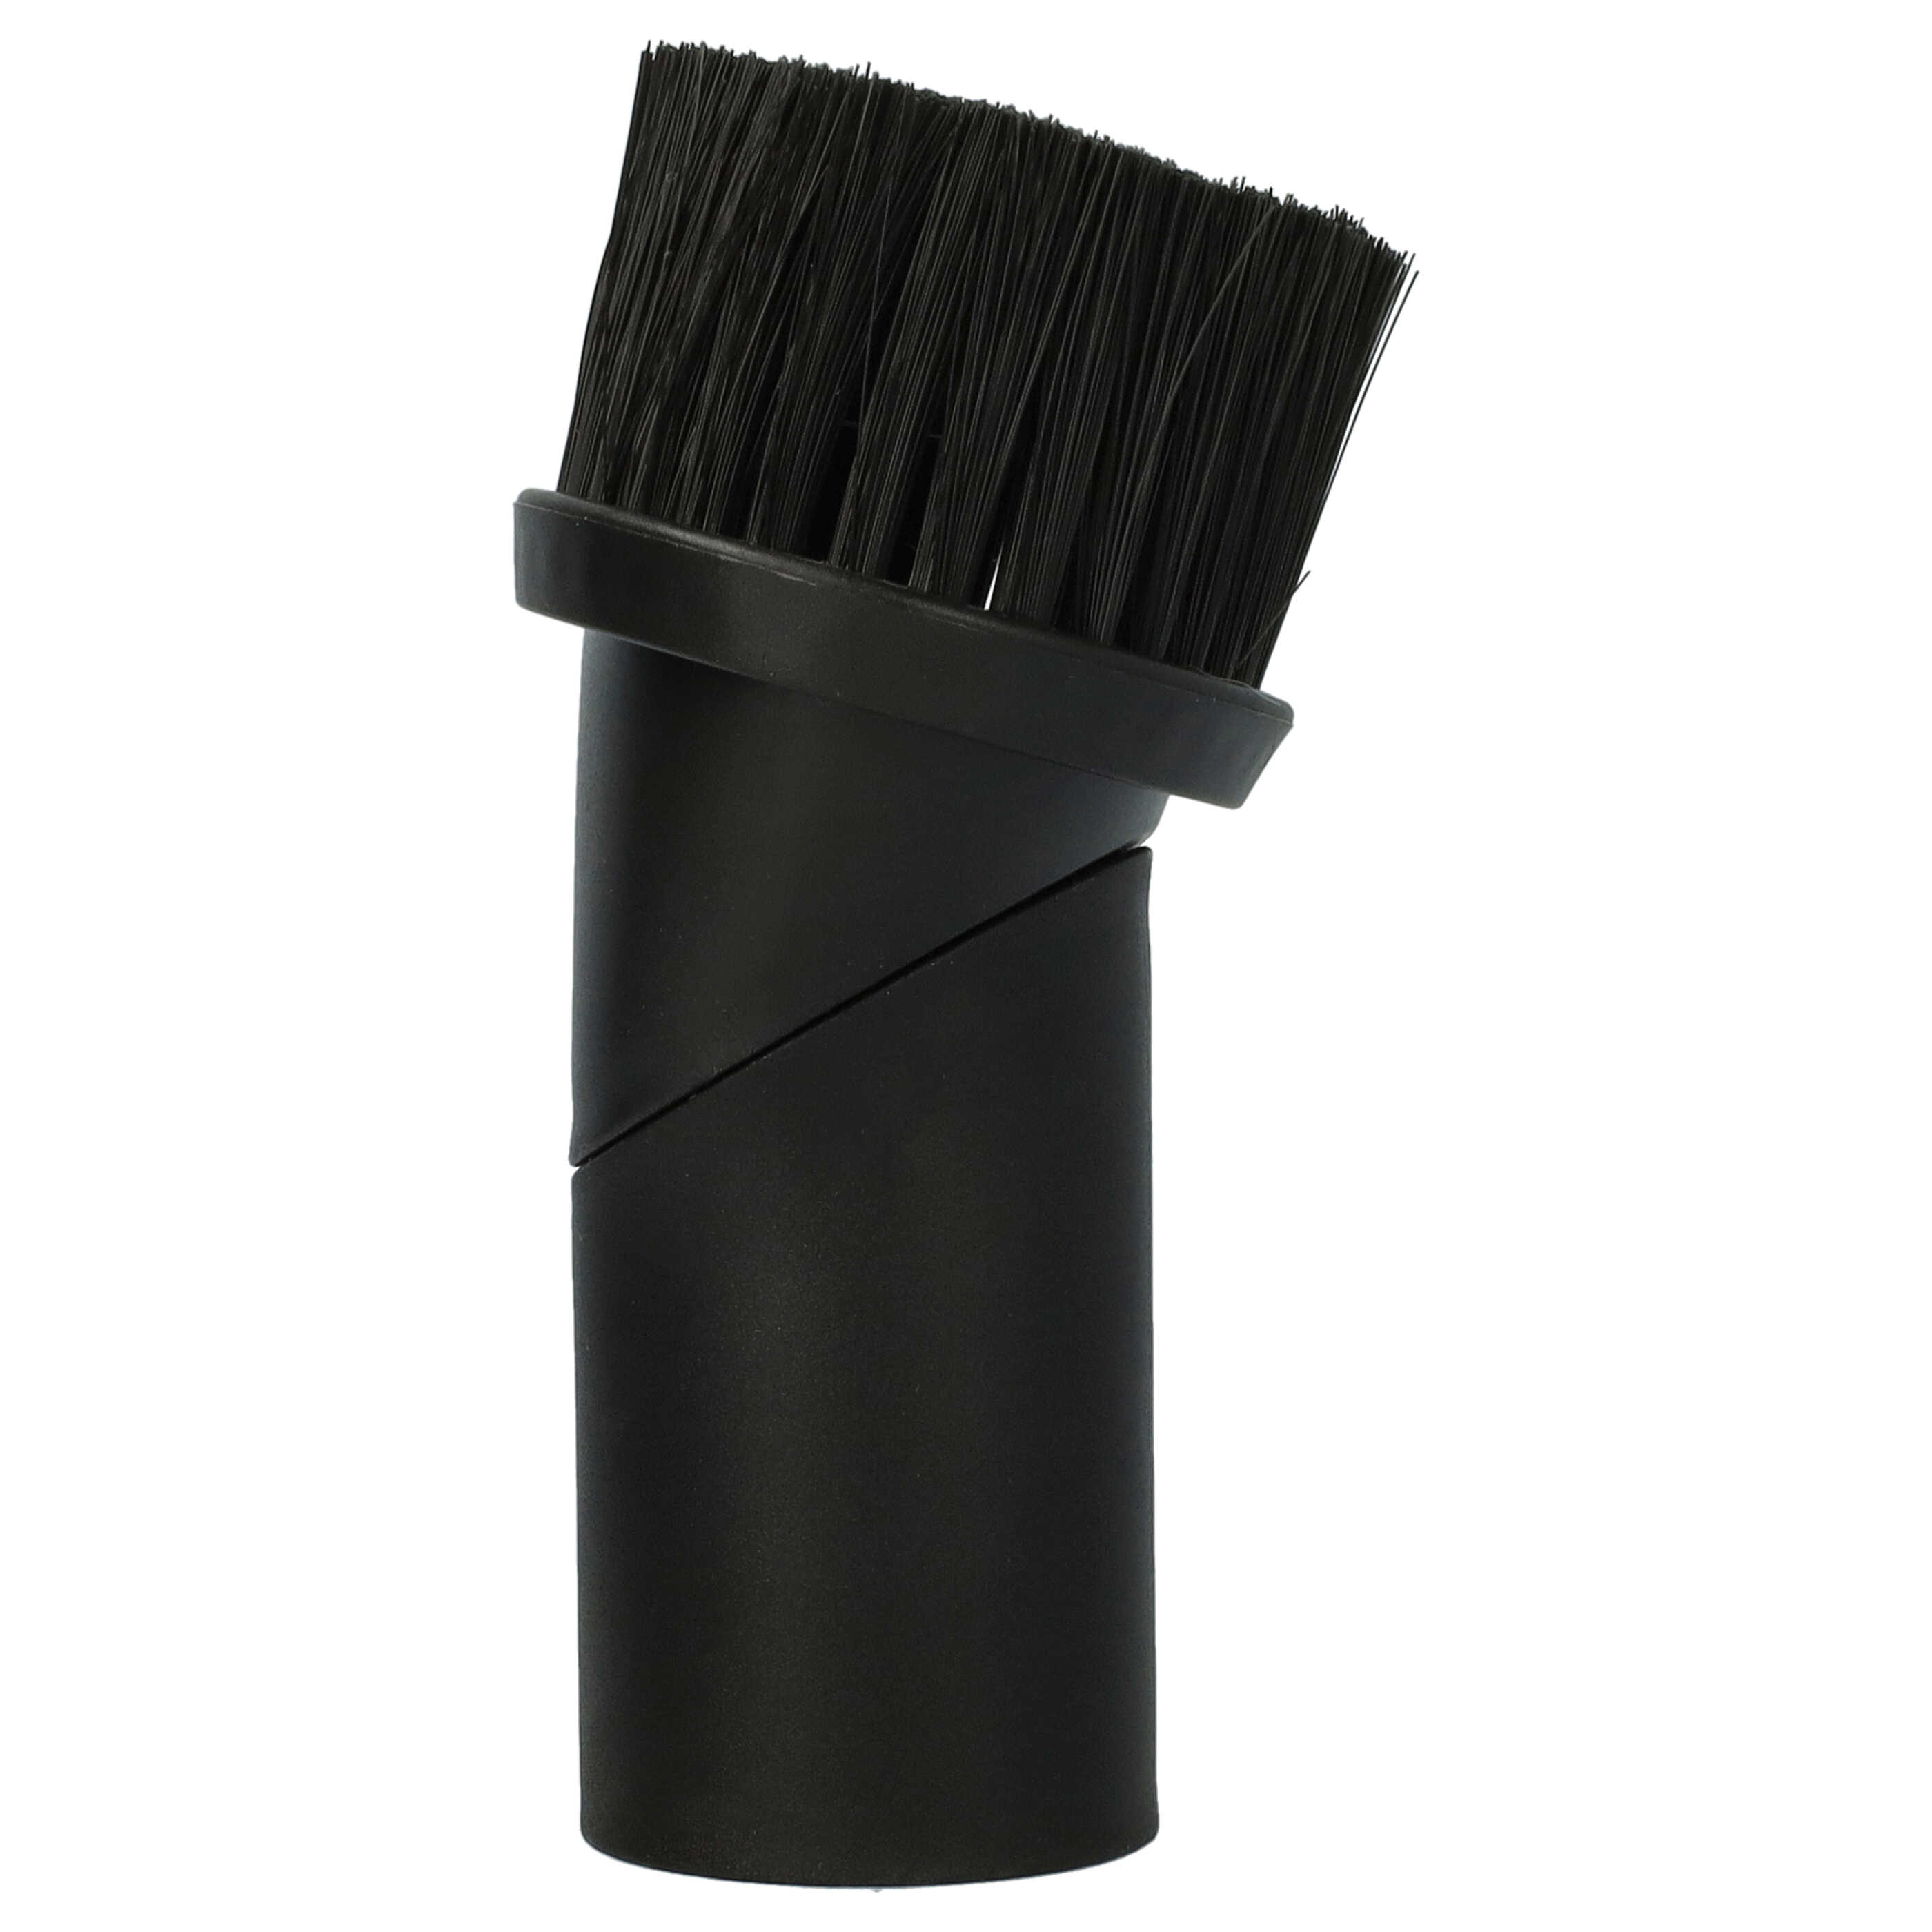  Brush Nozzle 35 mm Connector for Vacuum Cleaner - Furniture Brush with Bristles